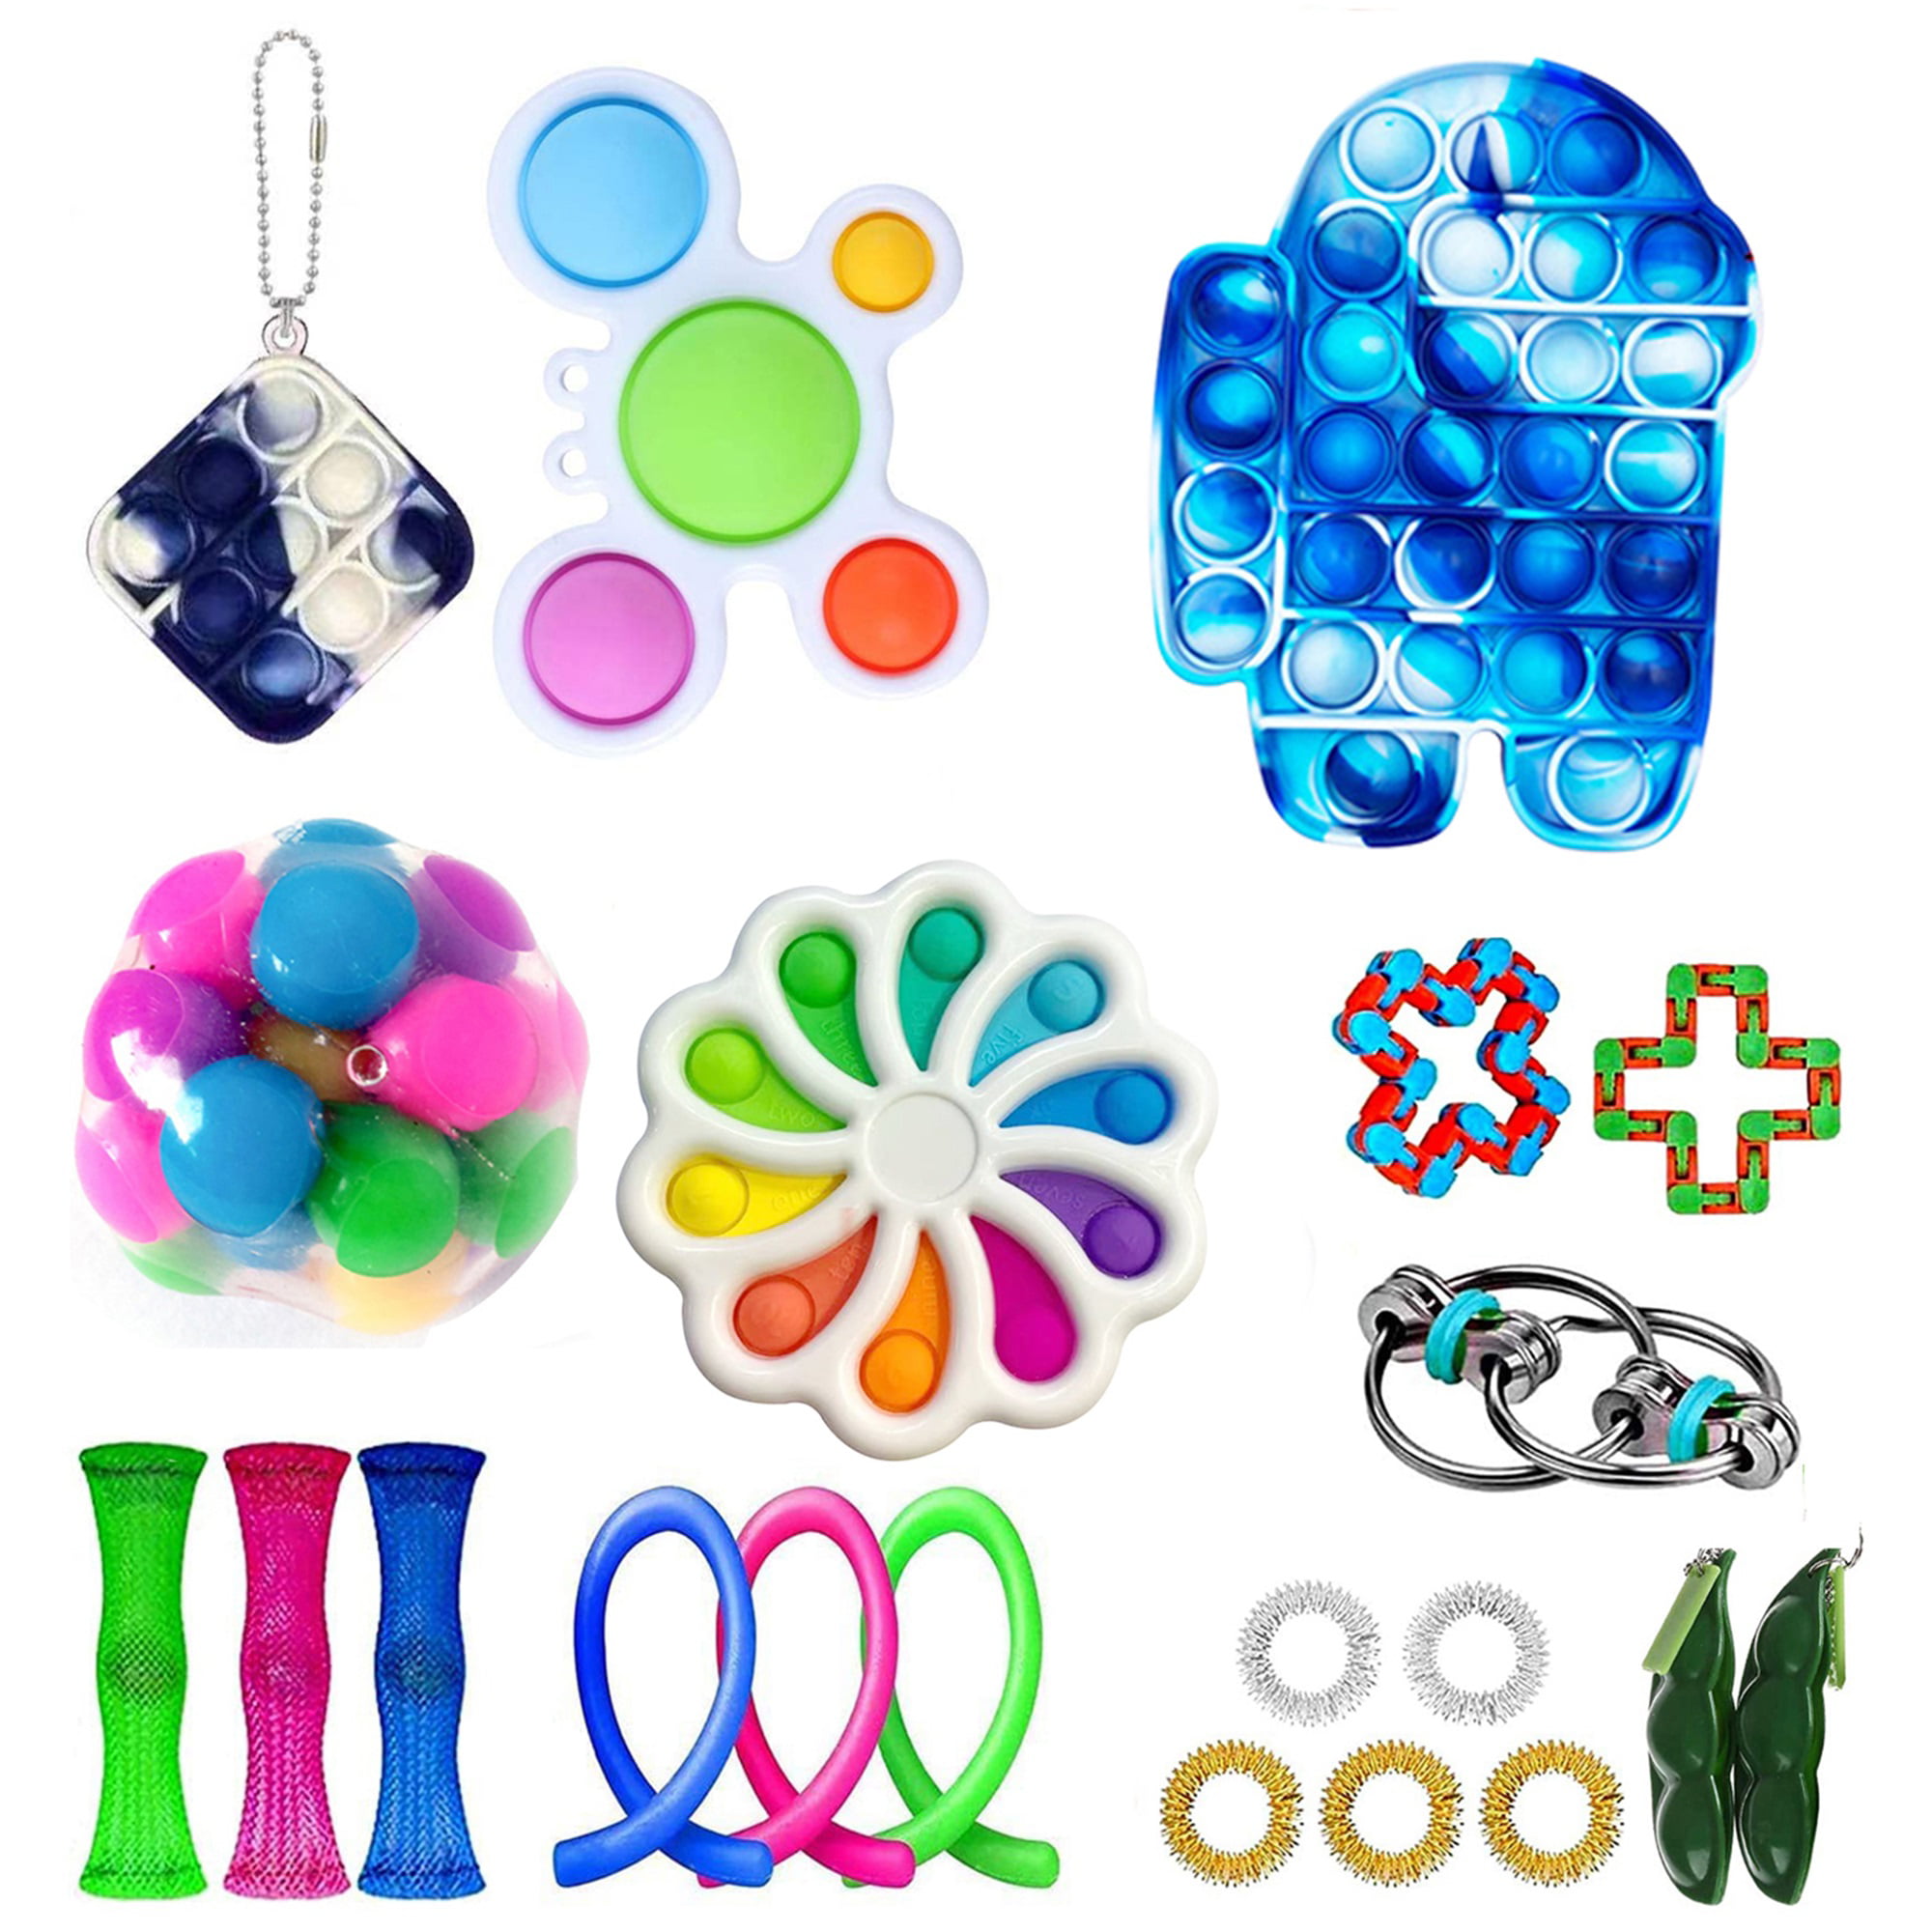 7PCS Figet Toys Set Sensory Tools Bundle Stress Relief Hand Toy Kids Adult Gifts 